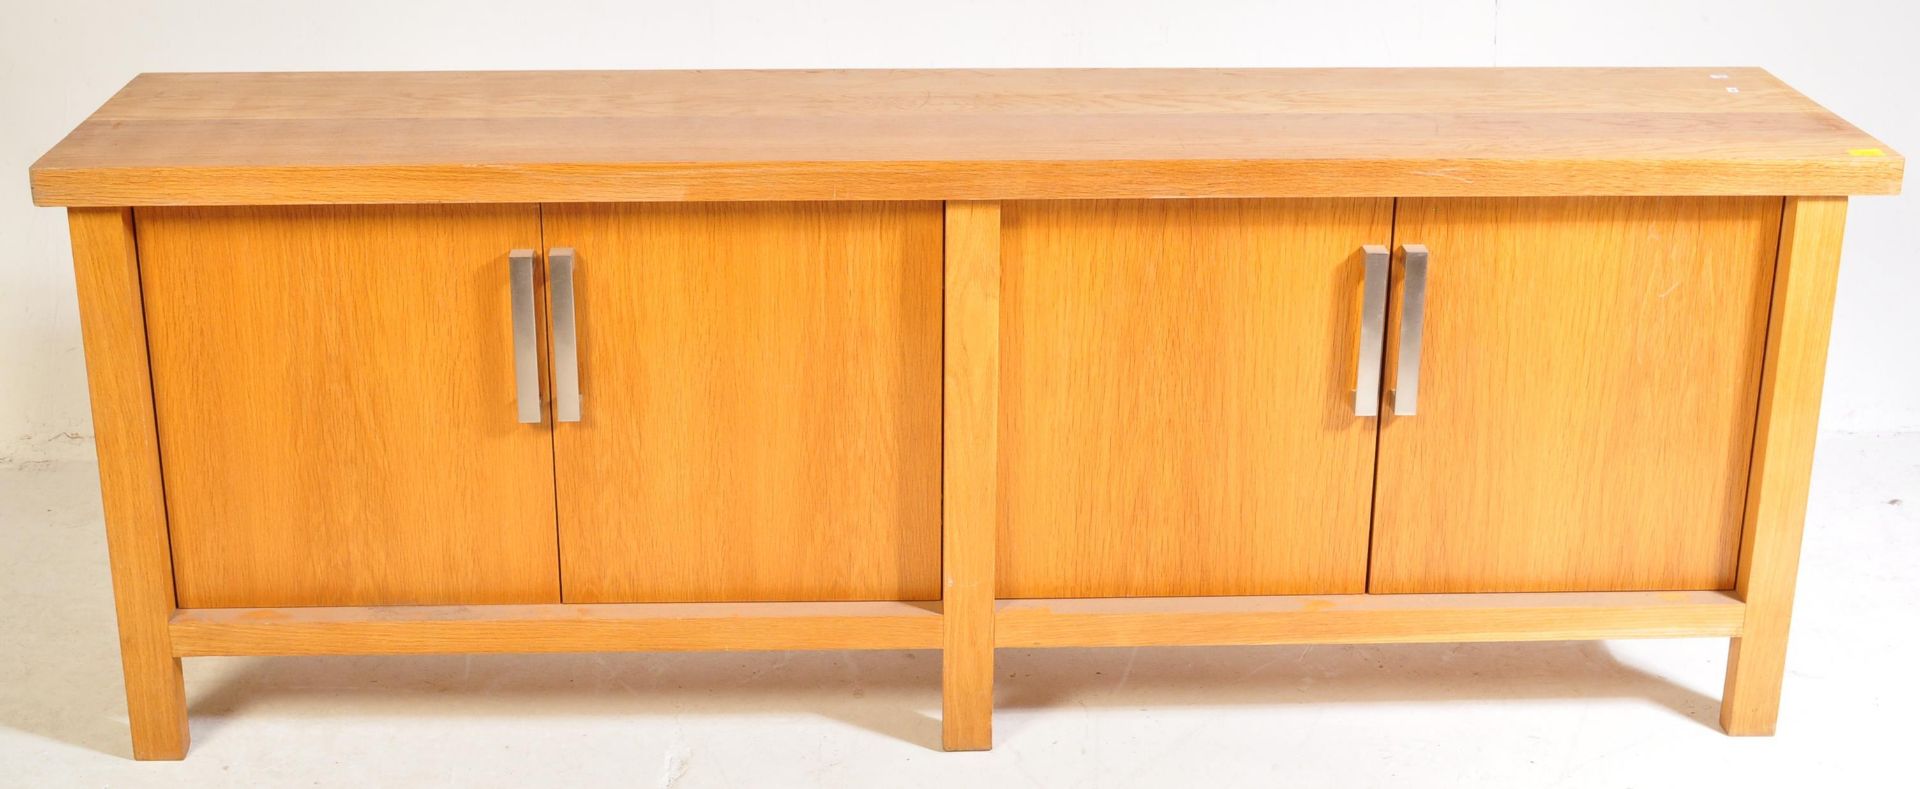 CONTEMPORARY OAK FURNITURE LAND STYLE SIDEBOARD - Image 2 of 5